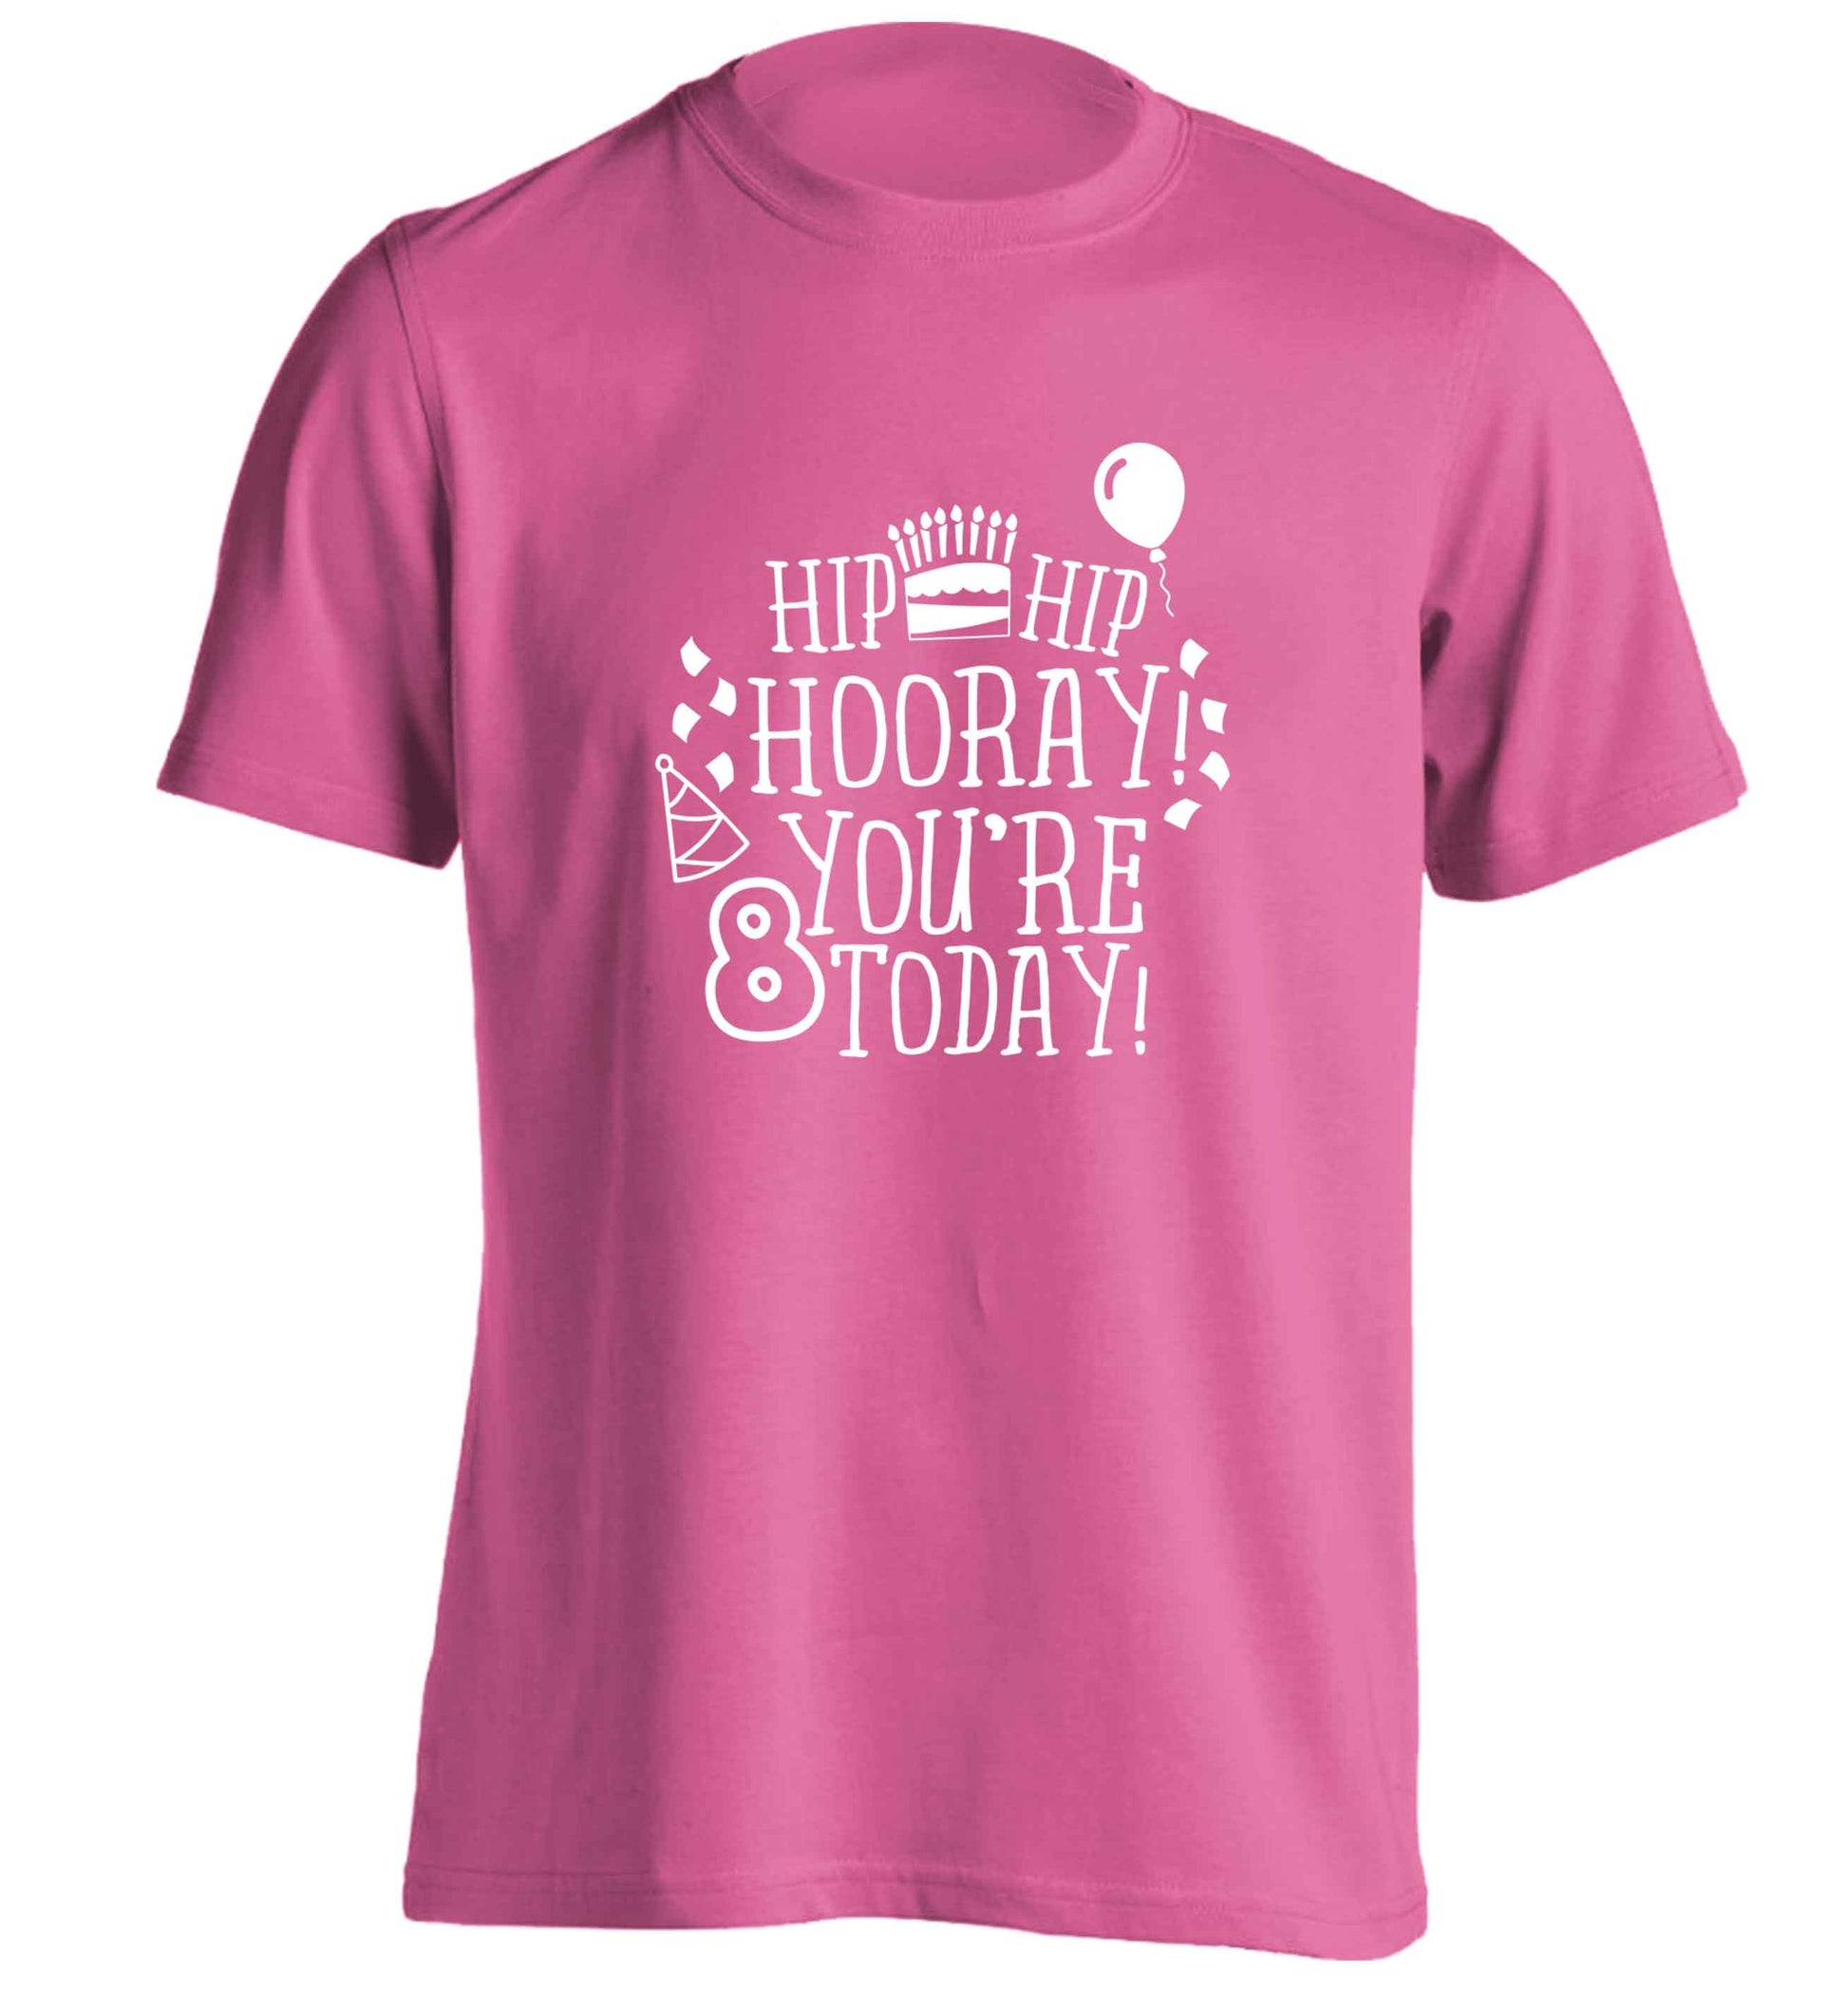 Hip hip hooray you're 8 today! adults unisex pink Tshirt 2XL